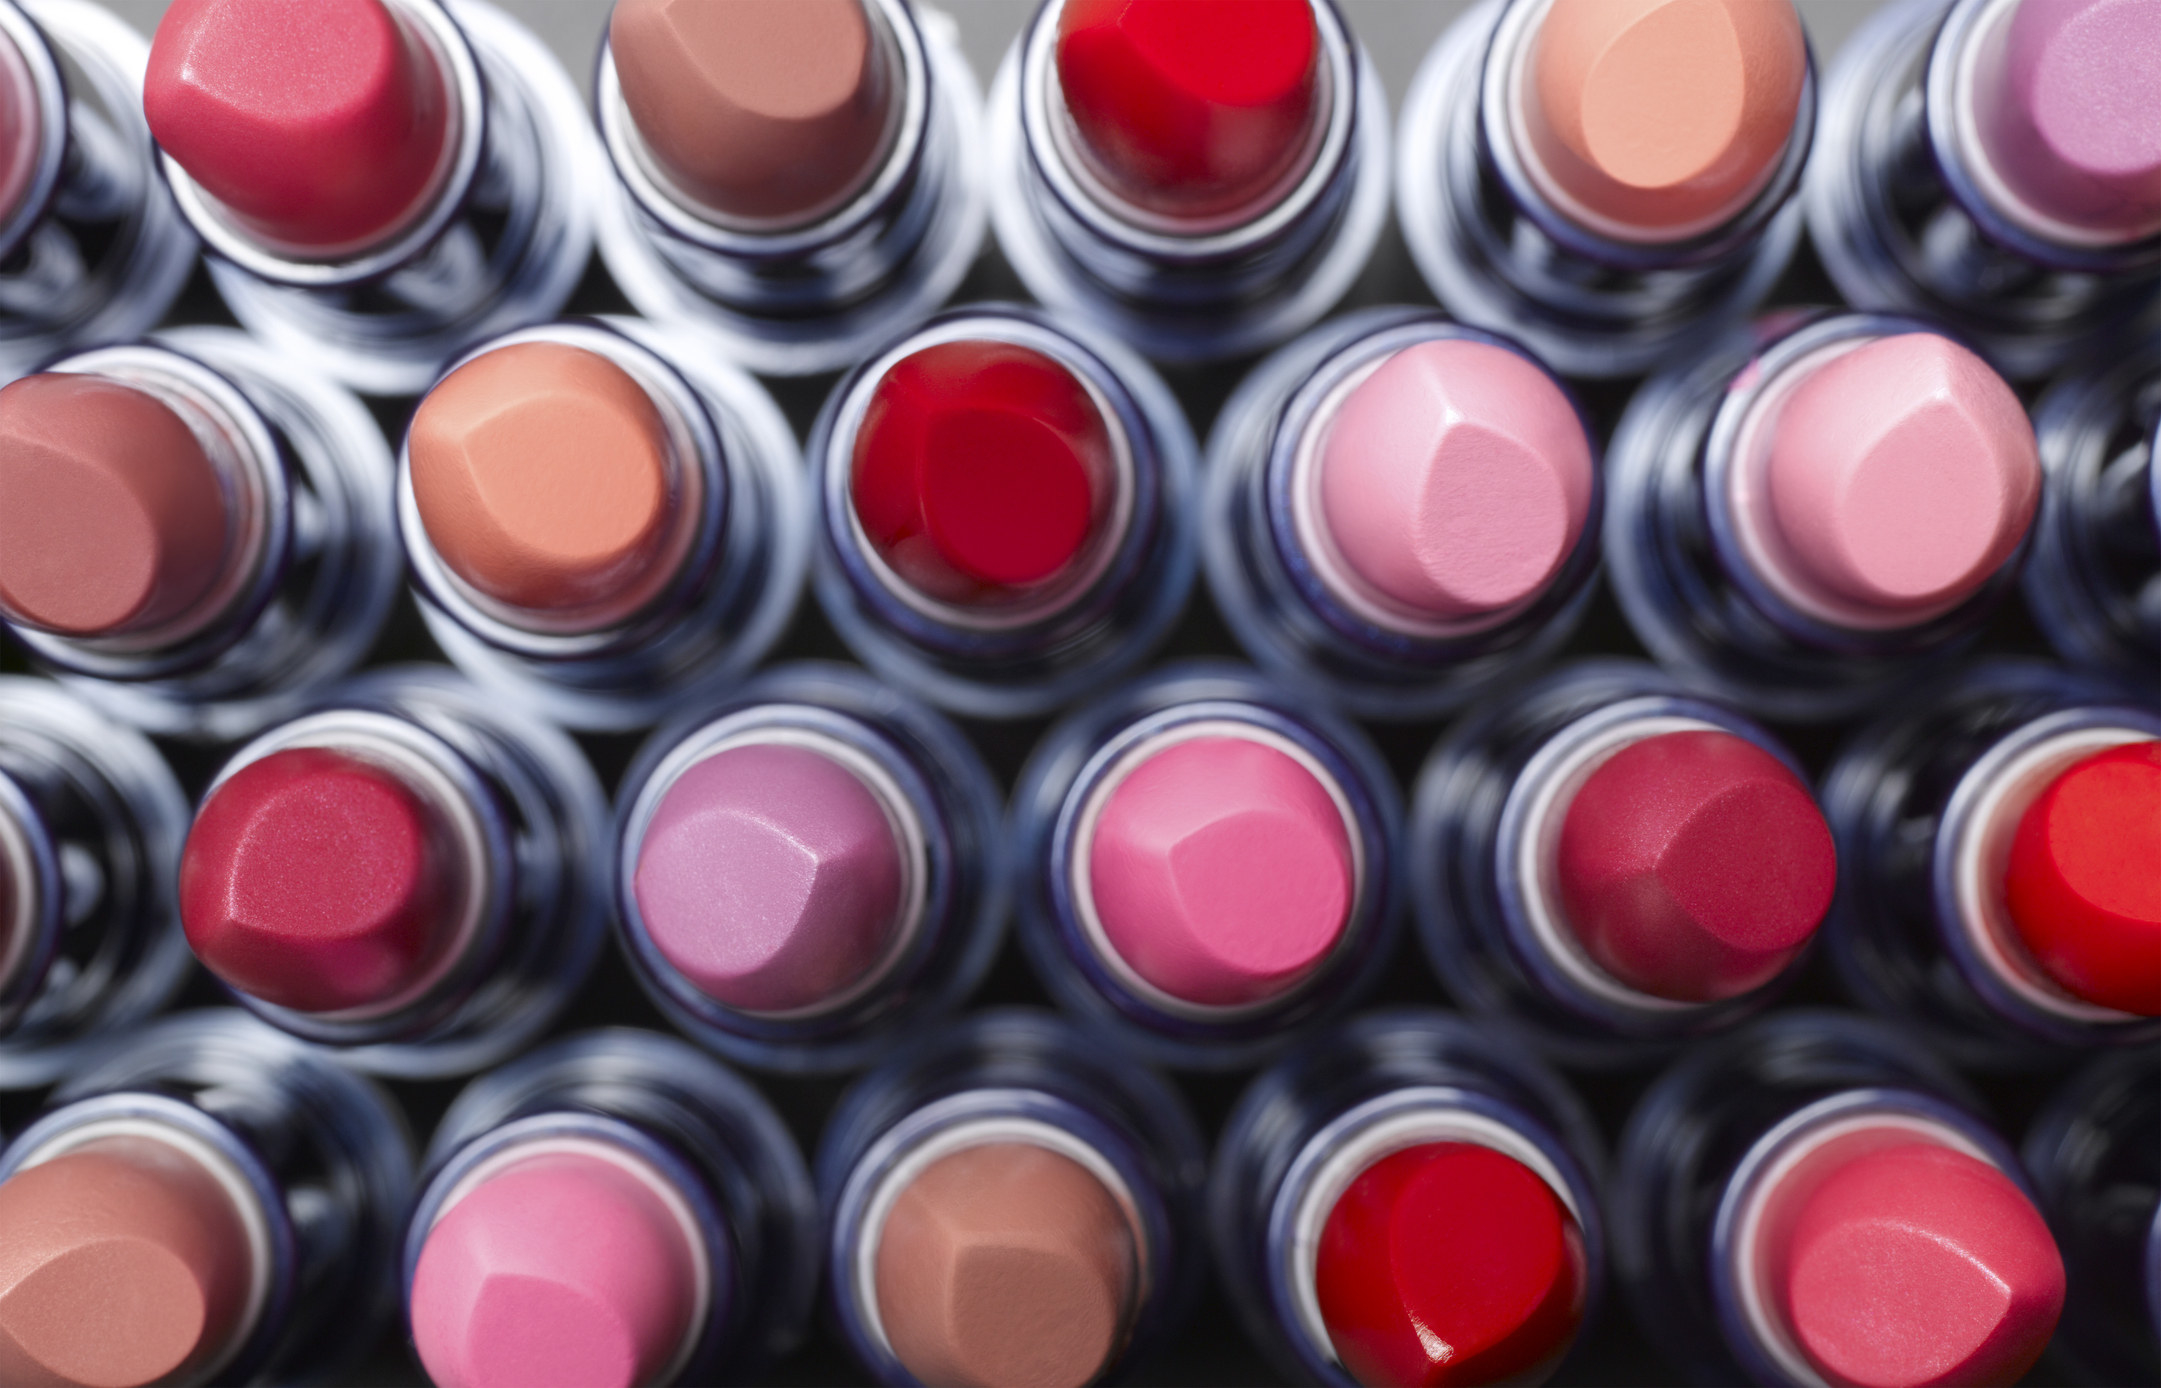 An array of lipstick colors